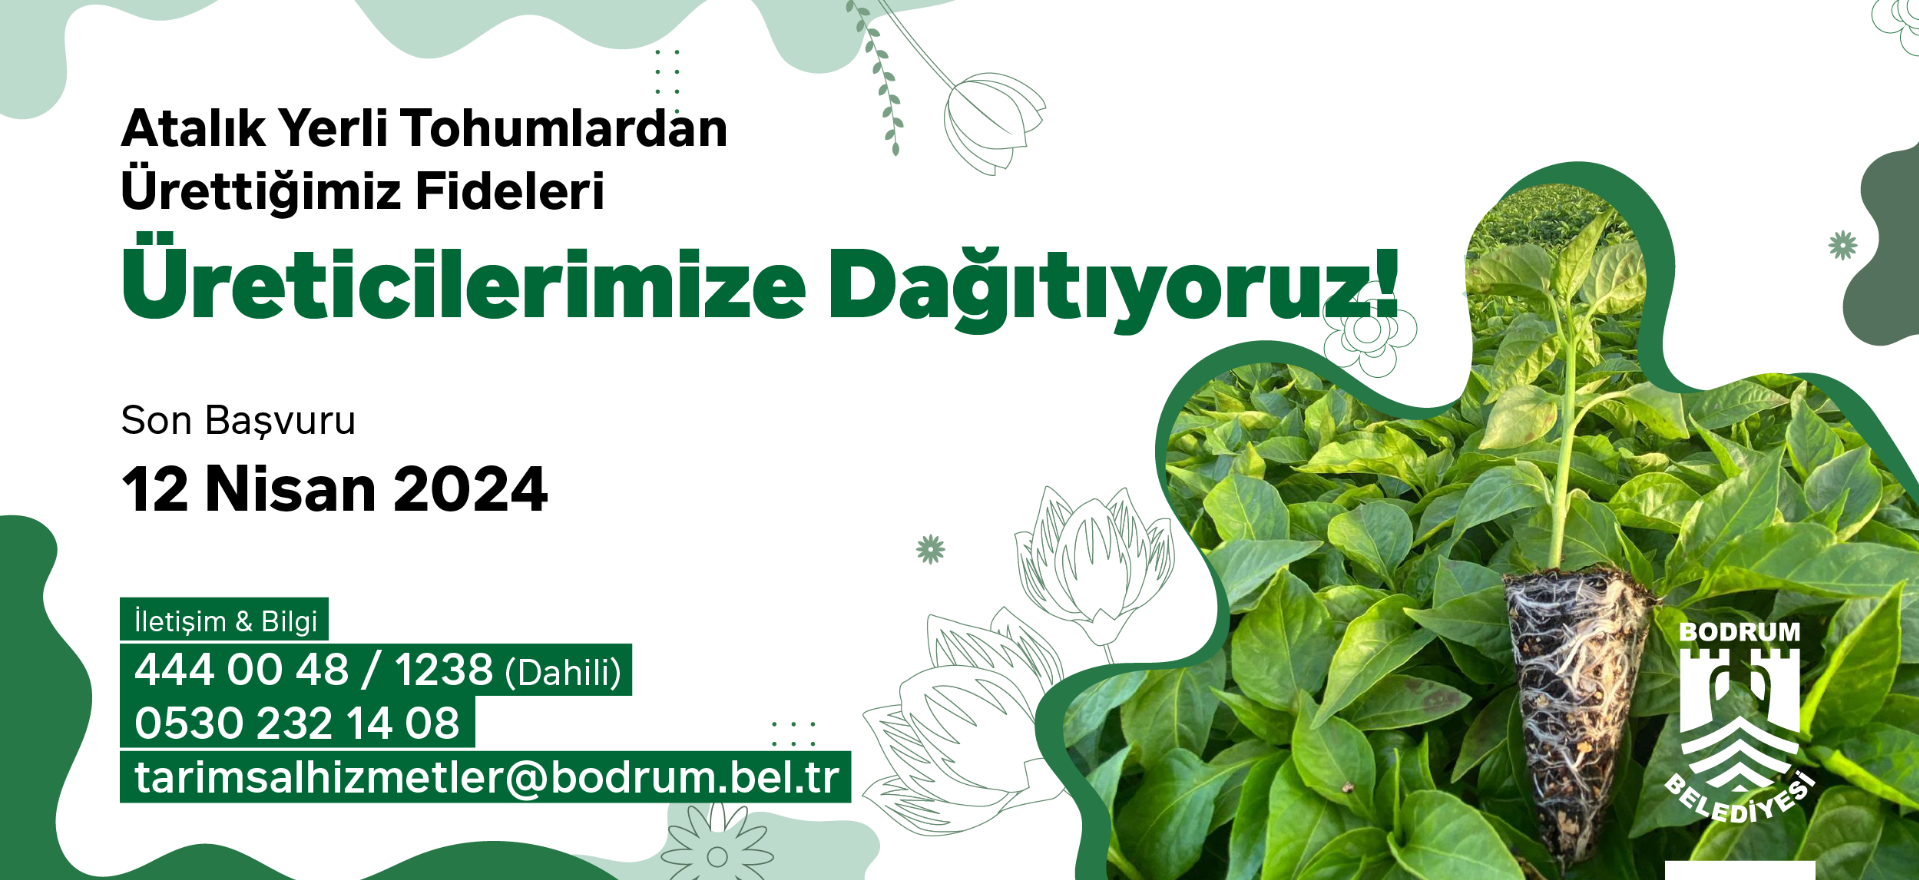 DISPERSING NATIVE SEEDLINGS BY BODRUM MUNICIPALITY